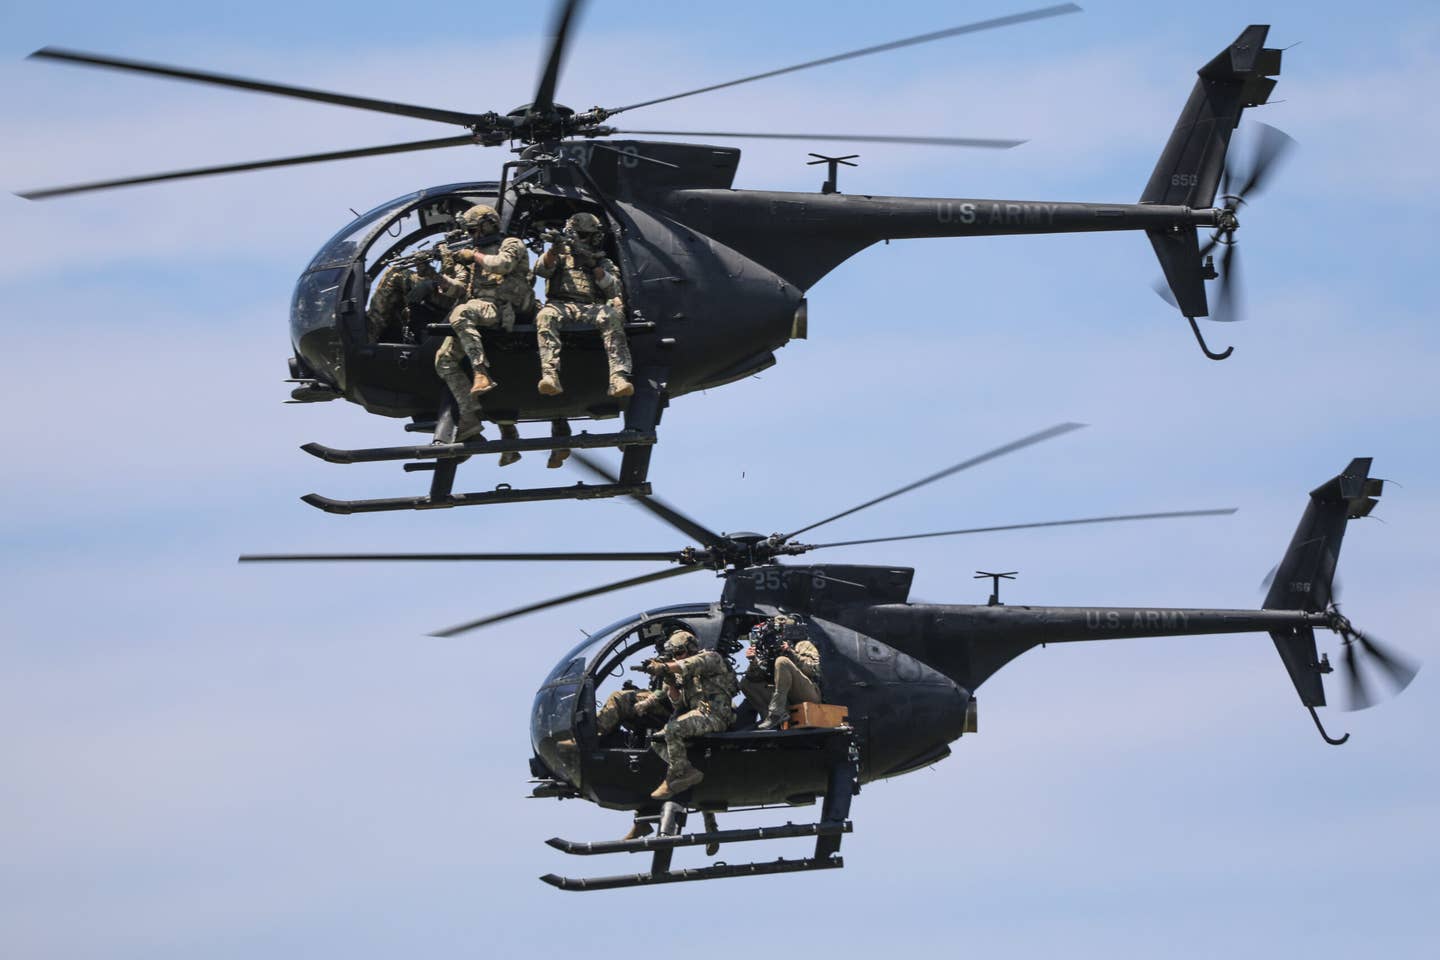 MH-6 Little Birds over Fort Campbell, Kentucky, in 2018. Image Used in the Special Operations Recruiting Battalion Campaign. <em>U.S. Army photo by Staff Sgt. Iman Broady-Chin</em>